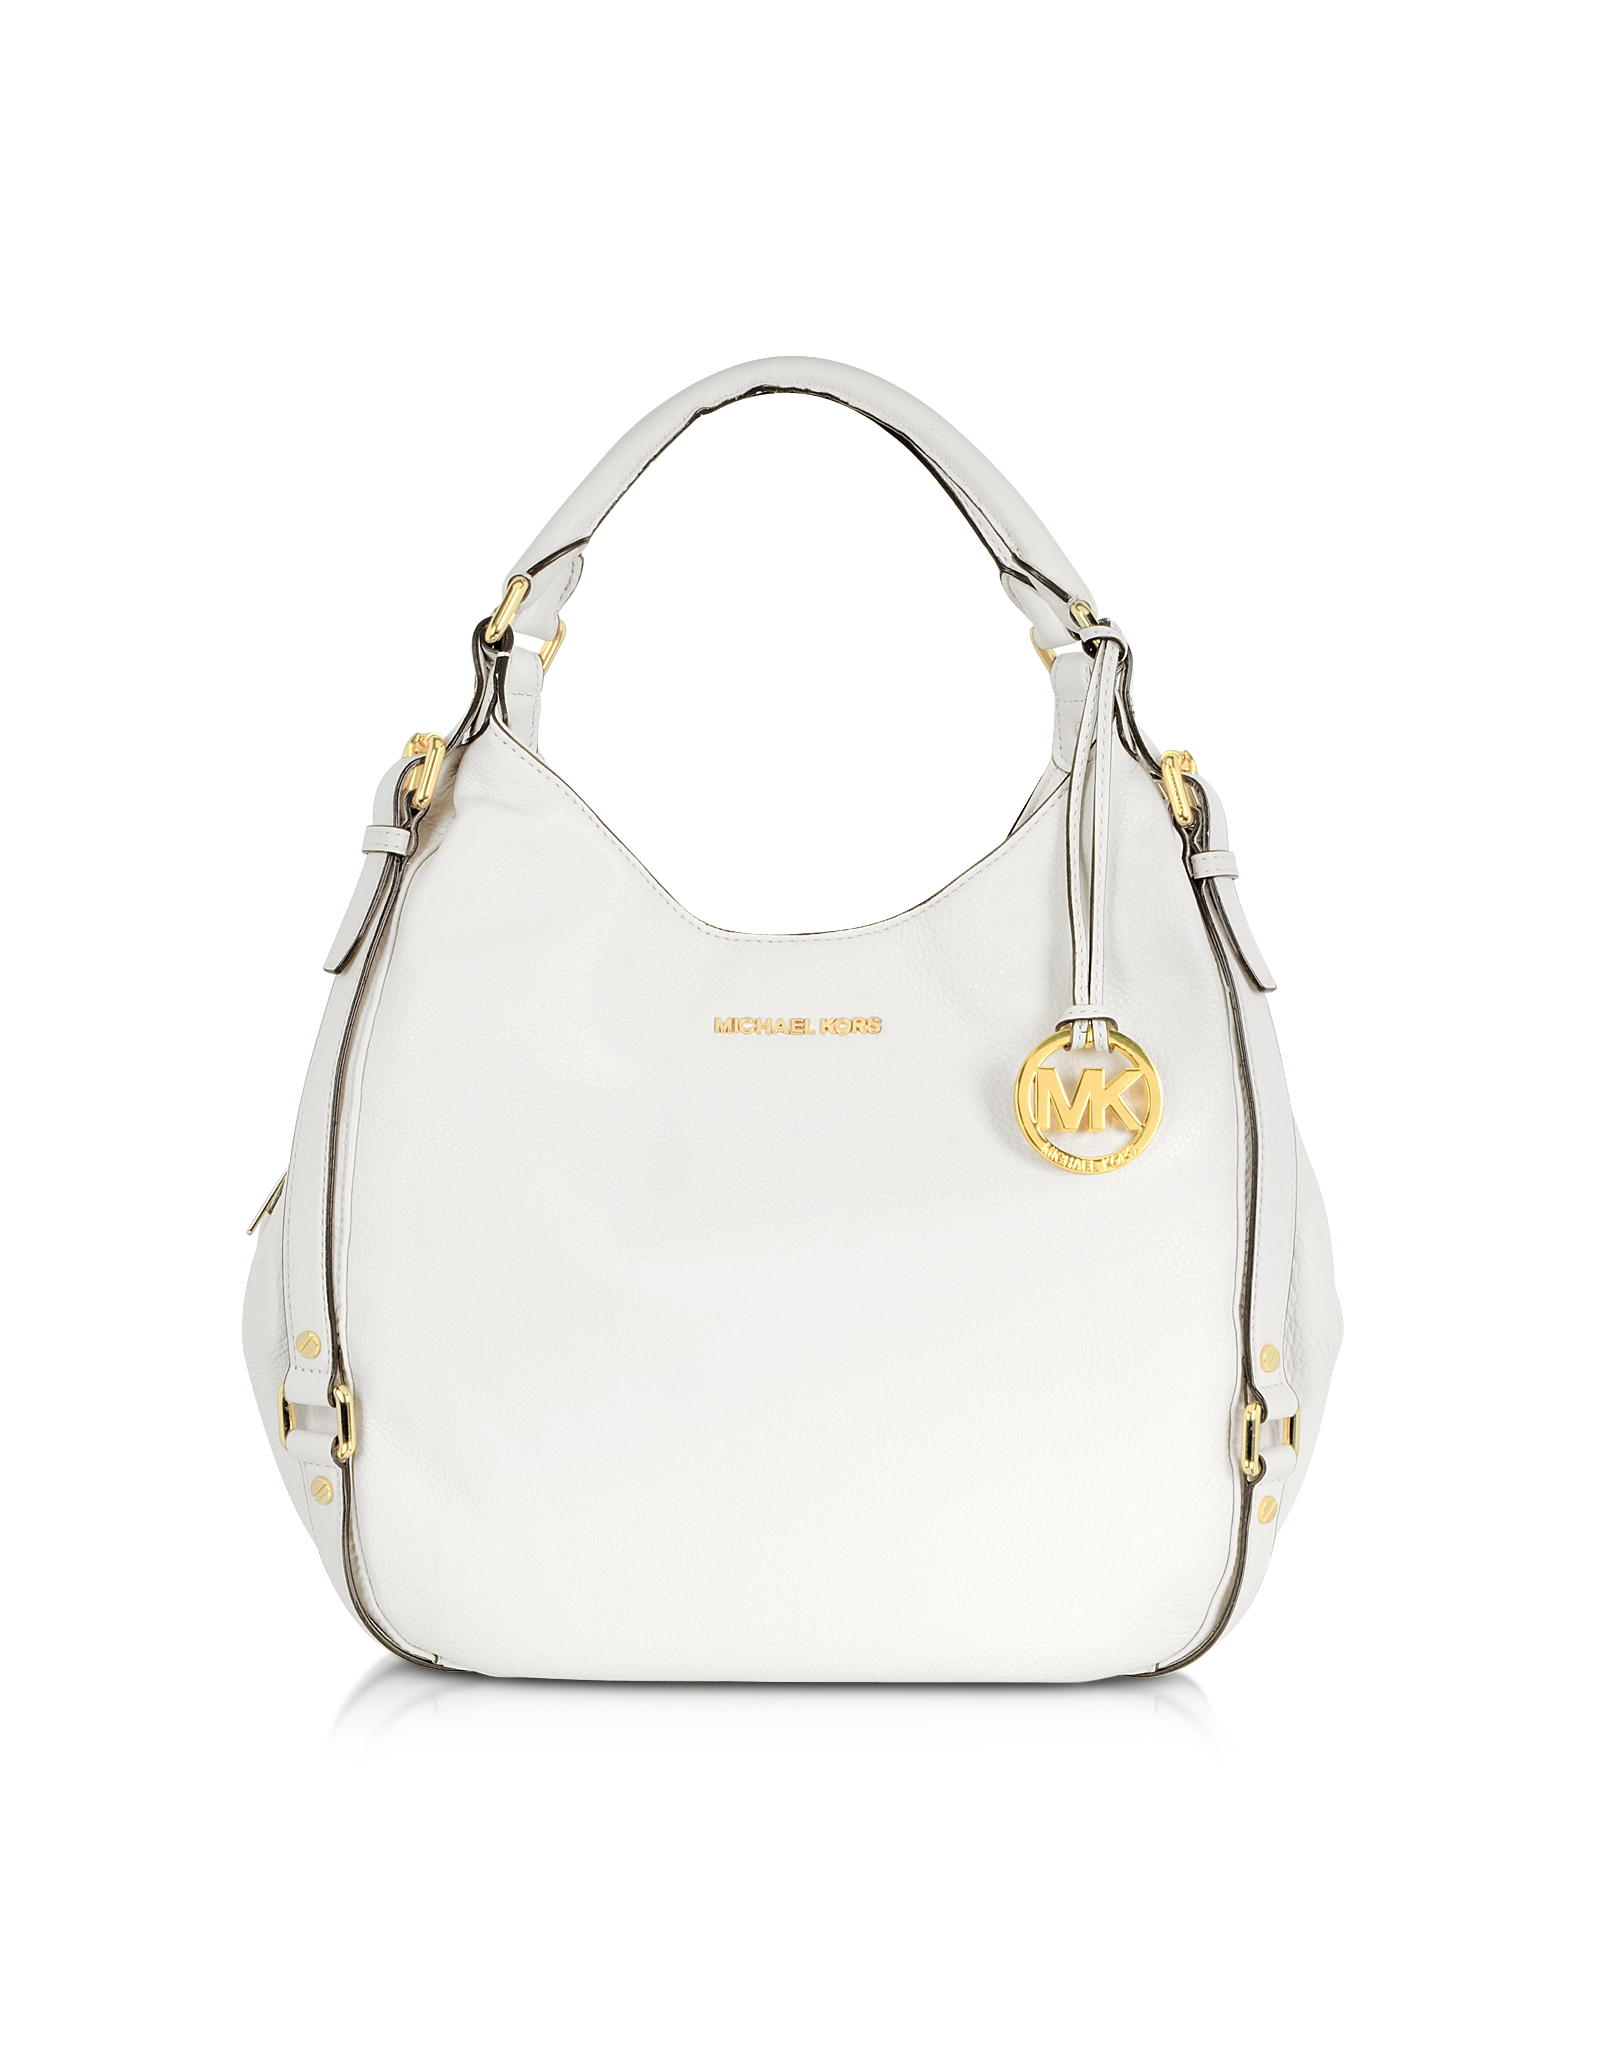 Lyst - Michael Kors Optic White Bedford Leather Shoulder Tote in White